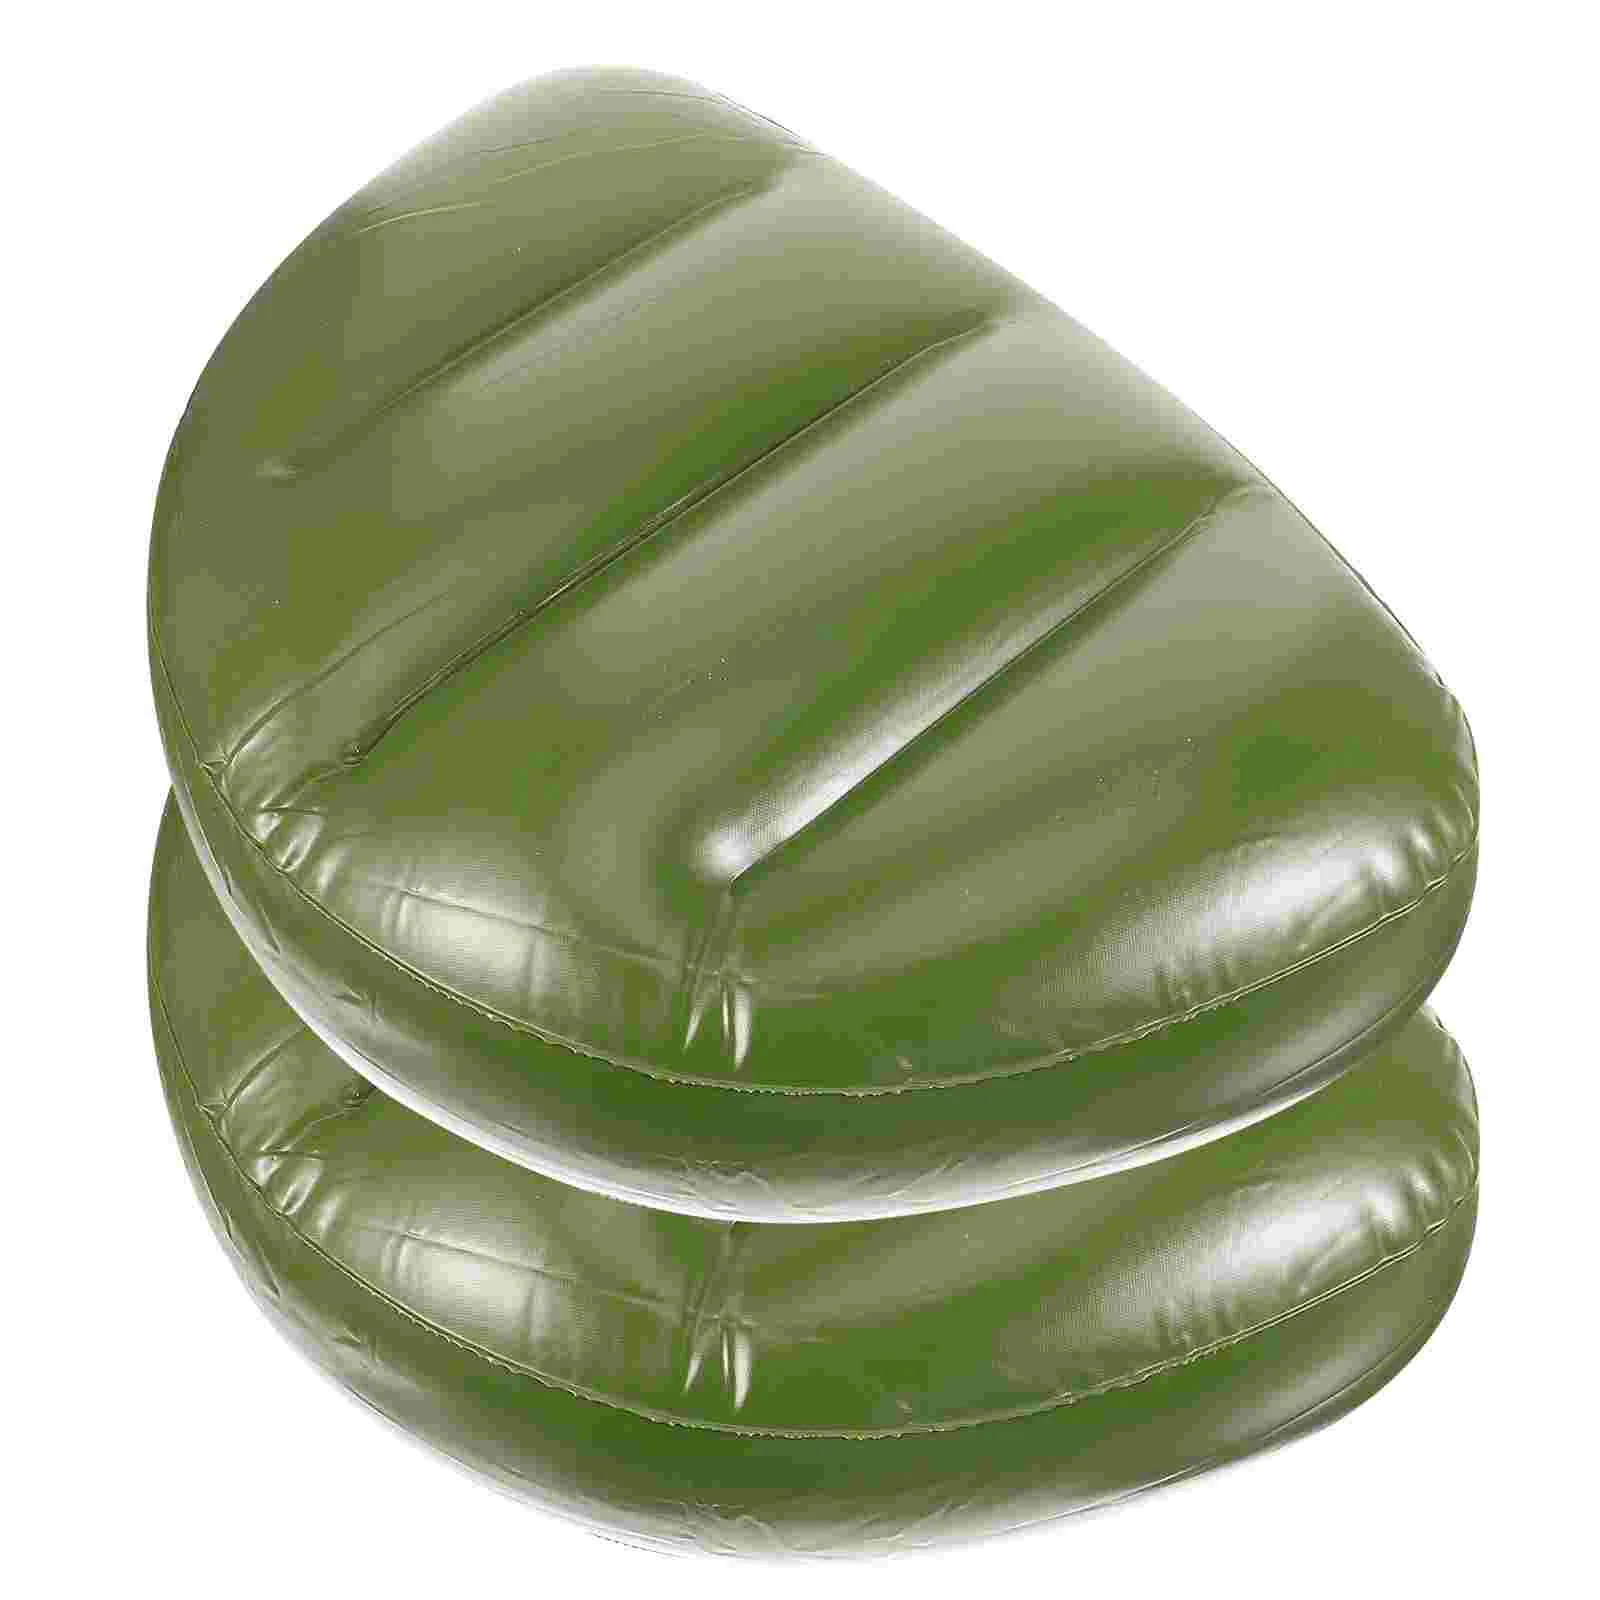 Air Cushion Inflatable Boat Camping PVC Seat Fishing Chair Seat Pad Fishing Cushion For Outdoor Camping Fishing Boat Green